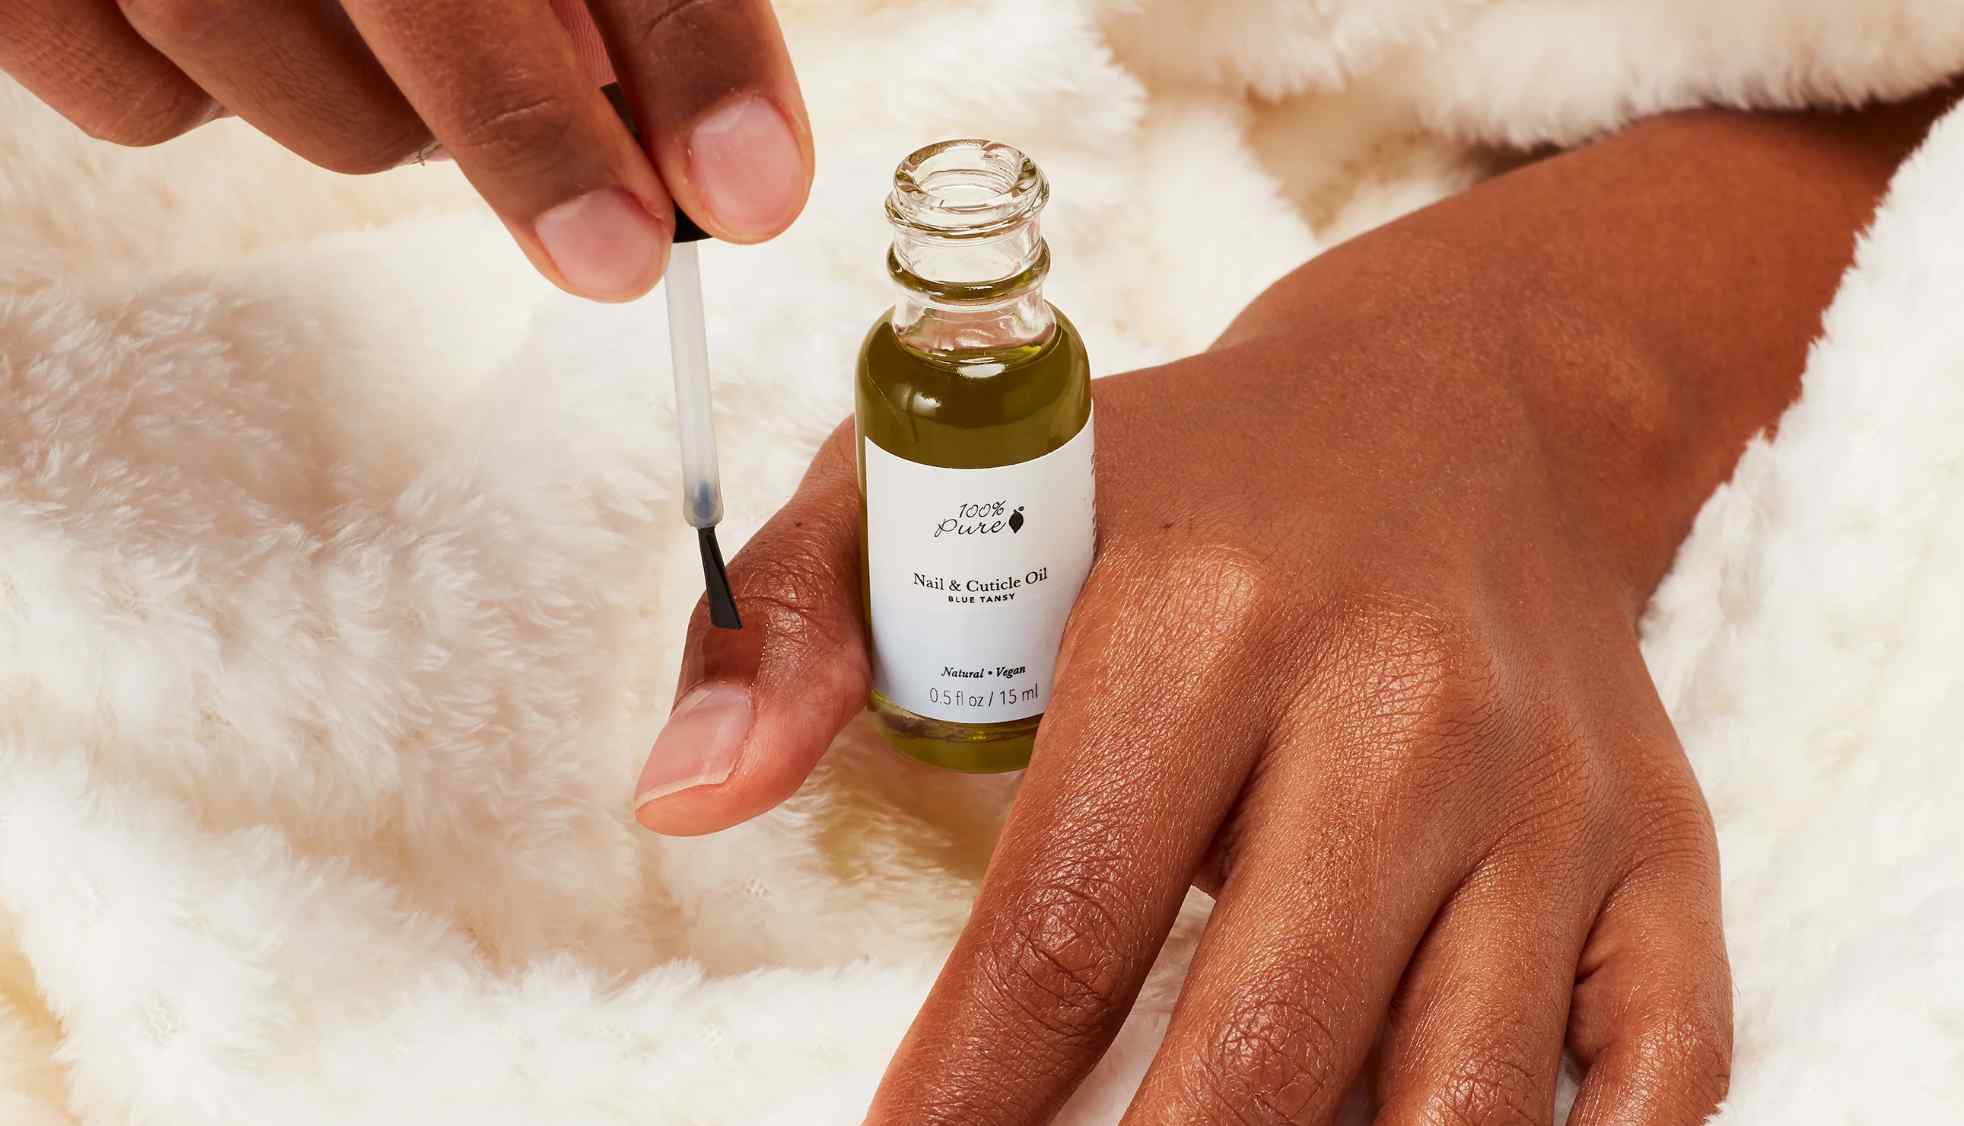 The oil benefits nails by moisturizing and nourishing the cuticles and nail bed.